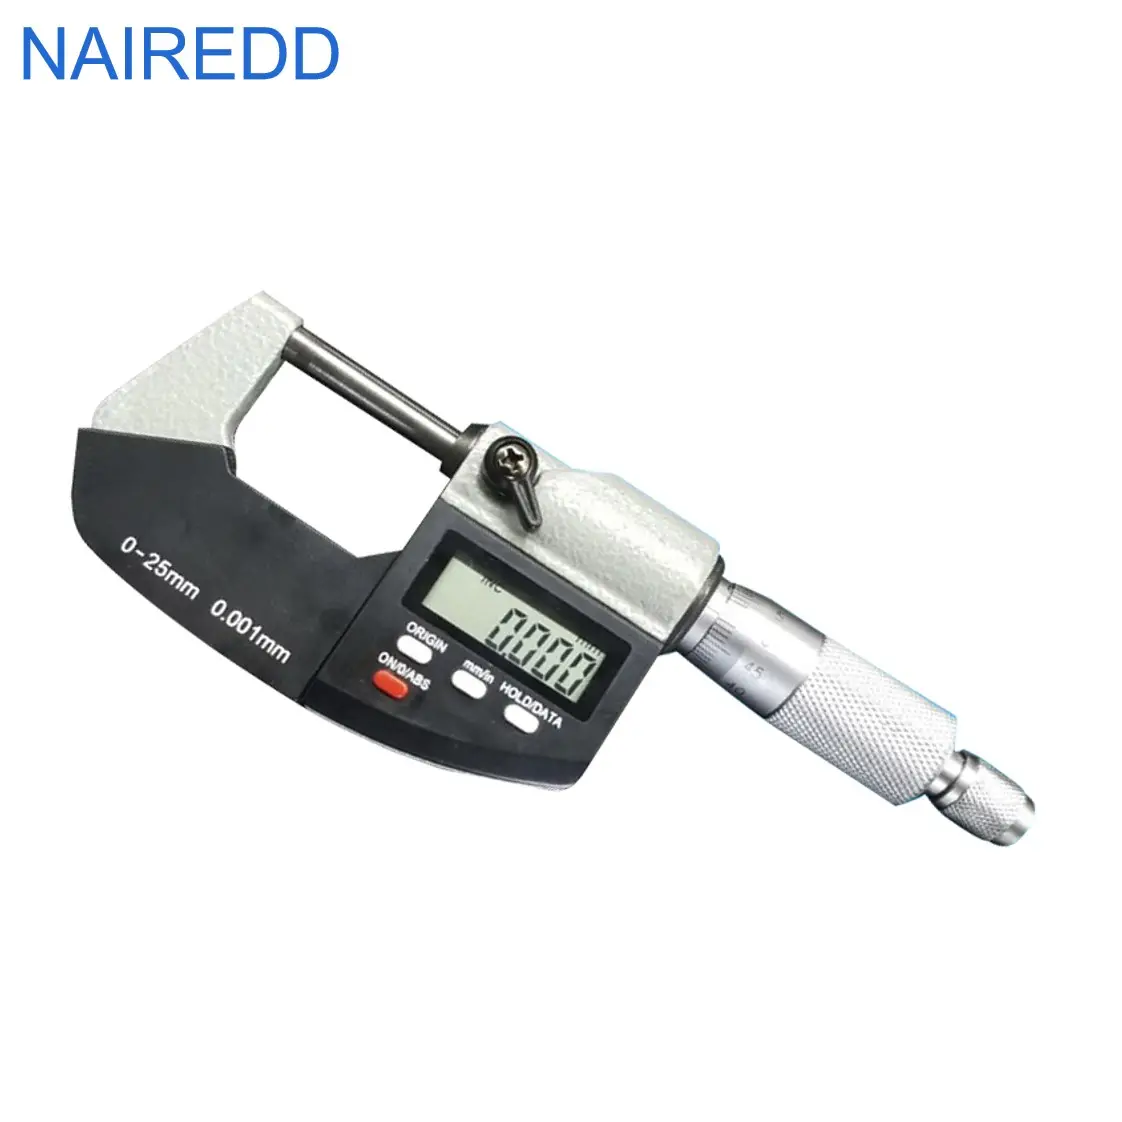 Digital Micrometer 0-25MM/0-1" 2-way electronic digital outside micrometer with laser engraved scale